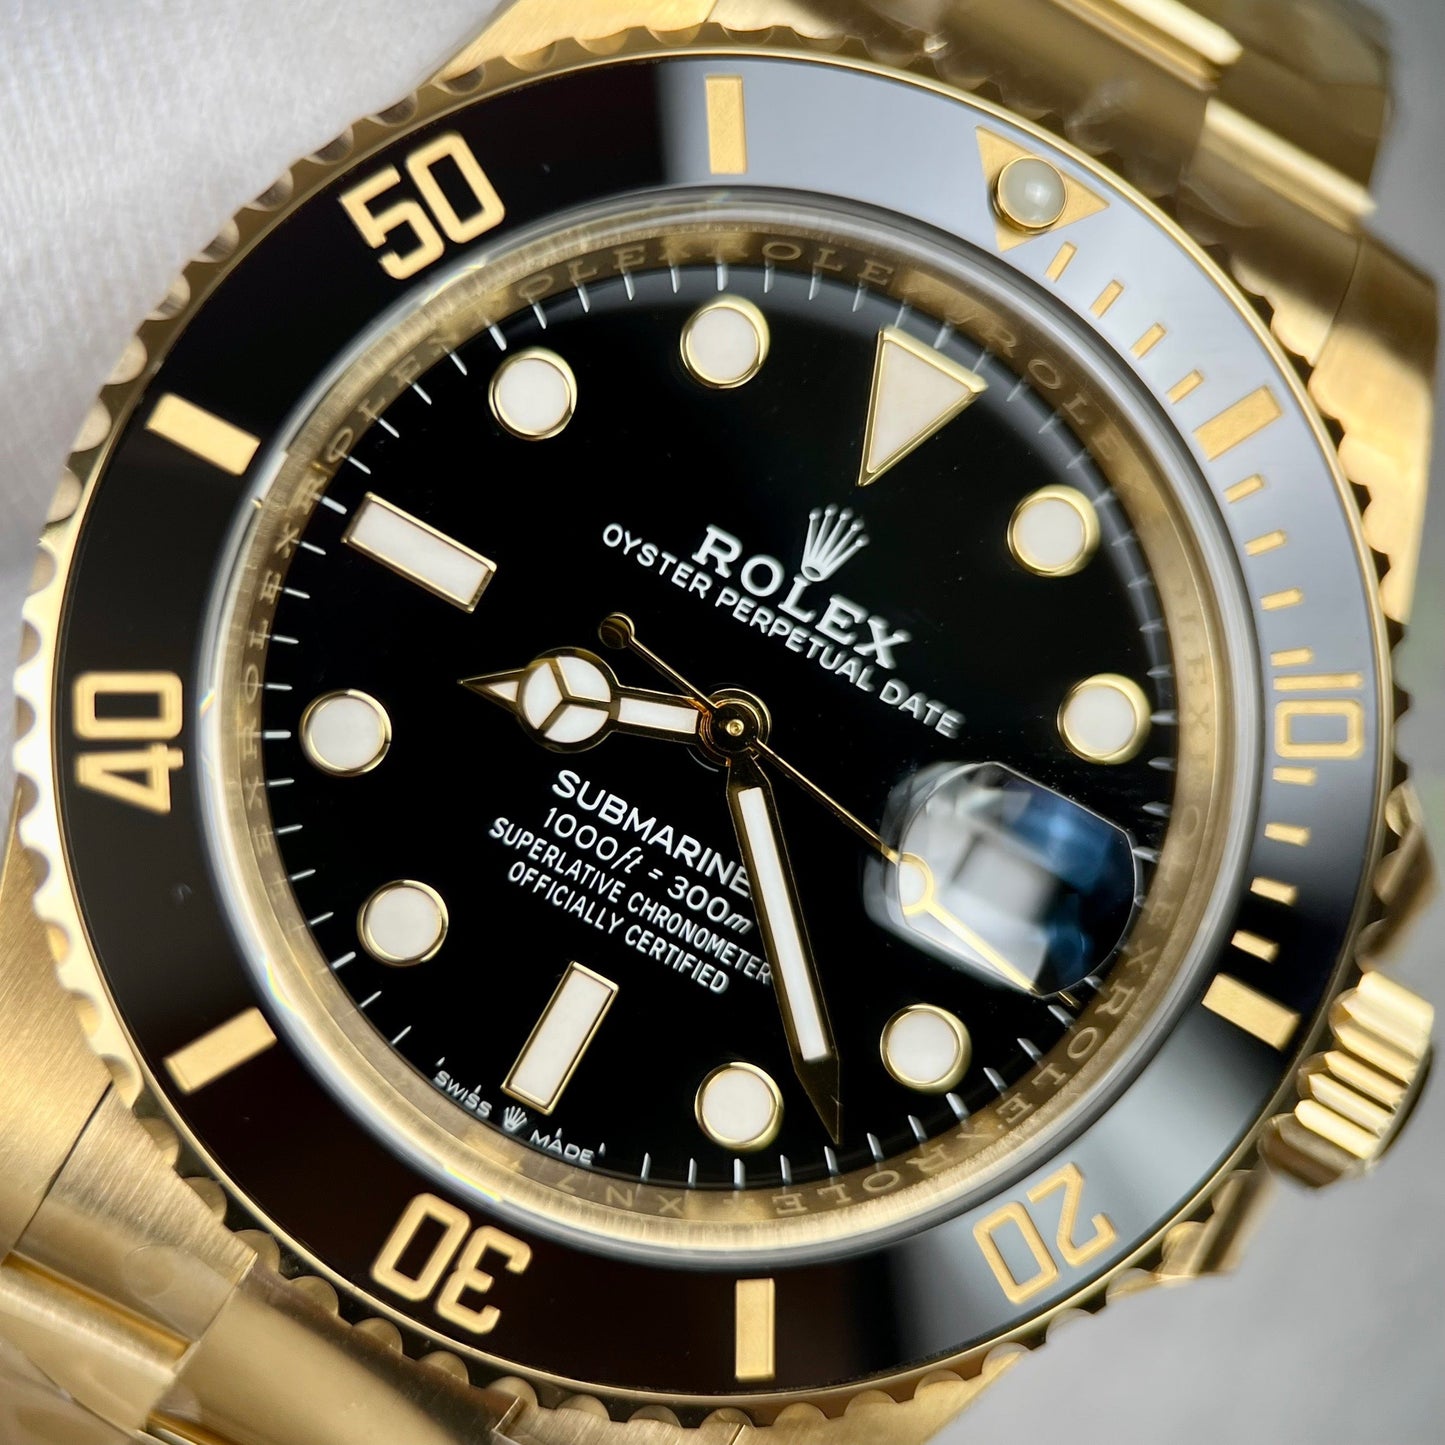 Rolex Submariner Date Black Dial Yellow Gold Men's Watch 126618LN-0002 wrapped 18k gold